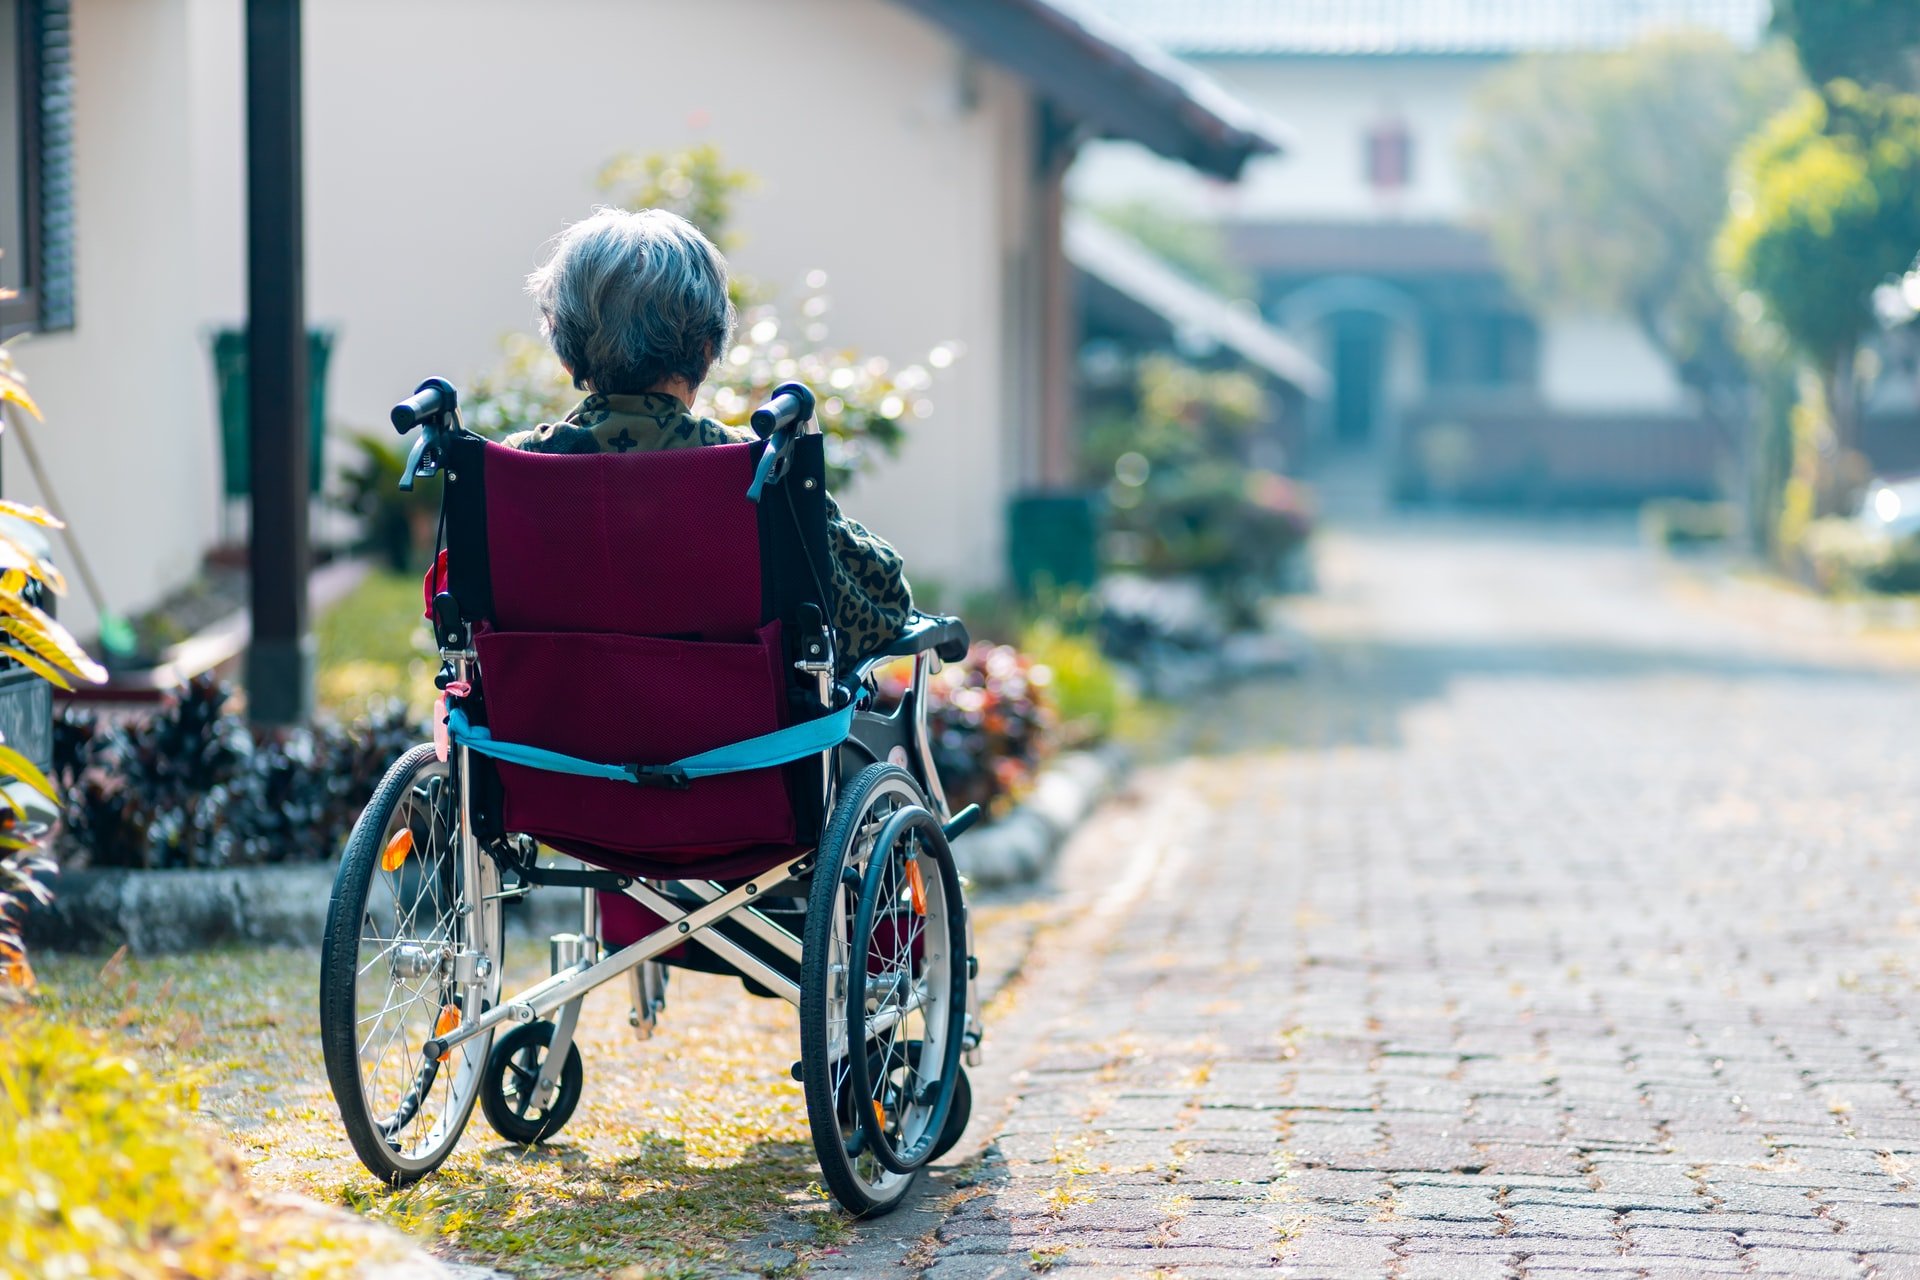 They bought Mrs.  Killinger a wheelchair, and the old lady cried at their kindness.  |  Source: Pexels